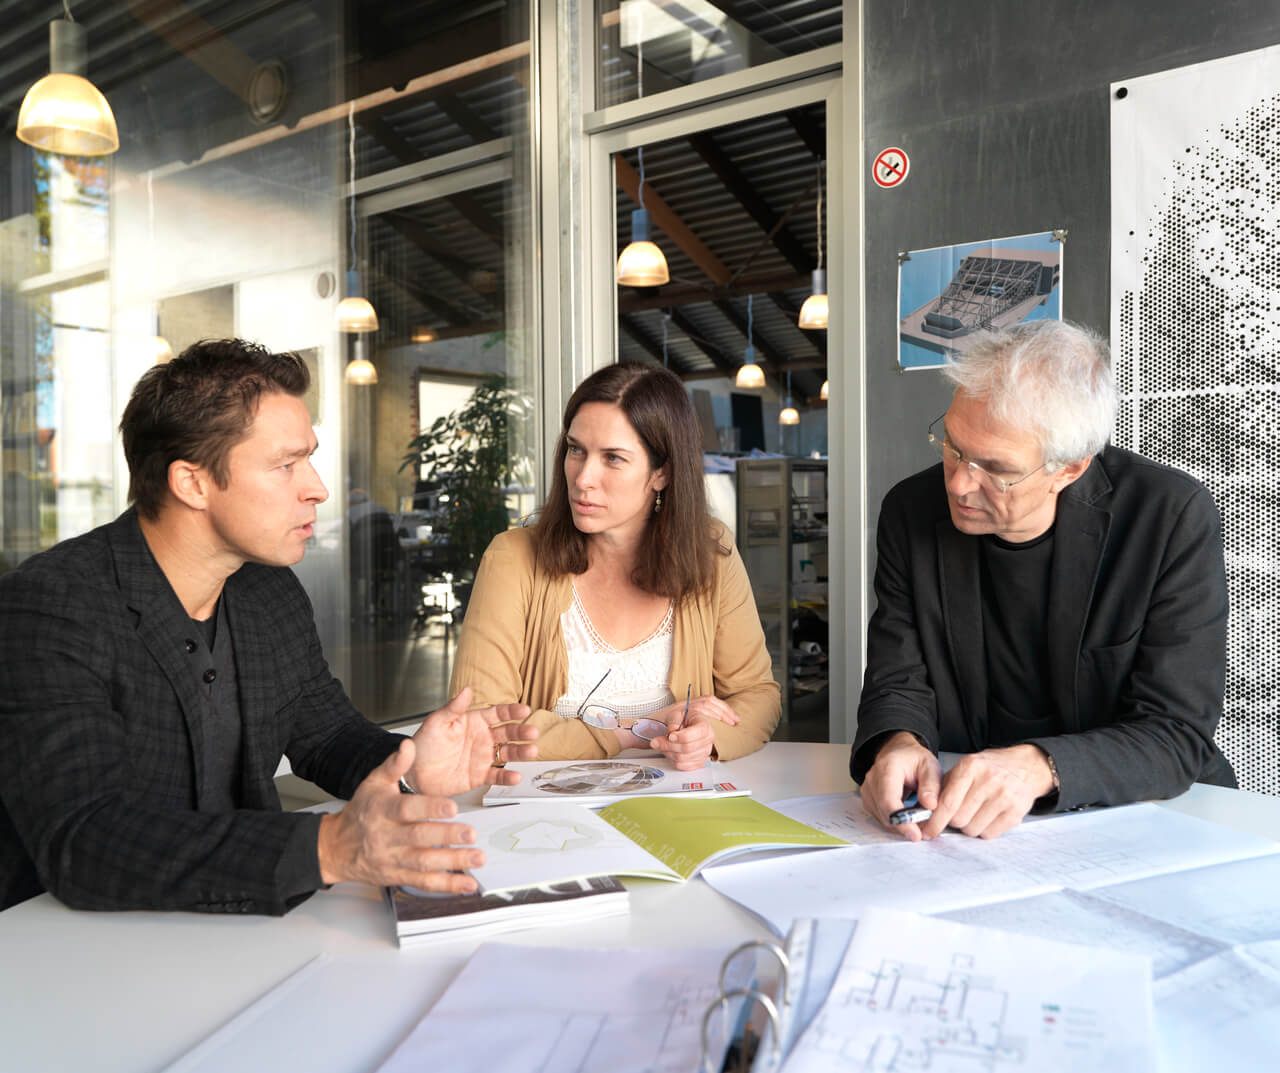 Professionals discussing plans in a modern office with documents on table.